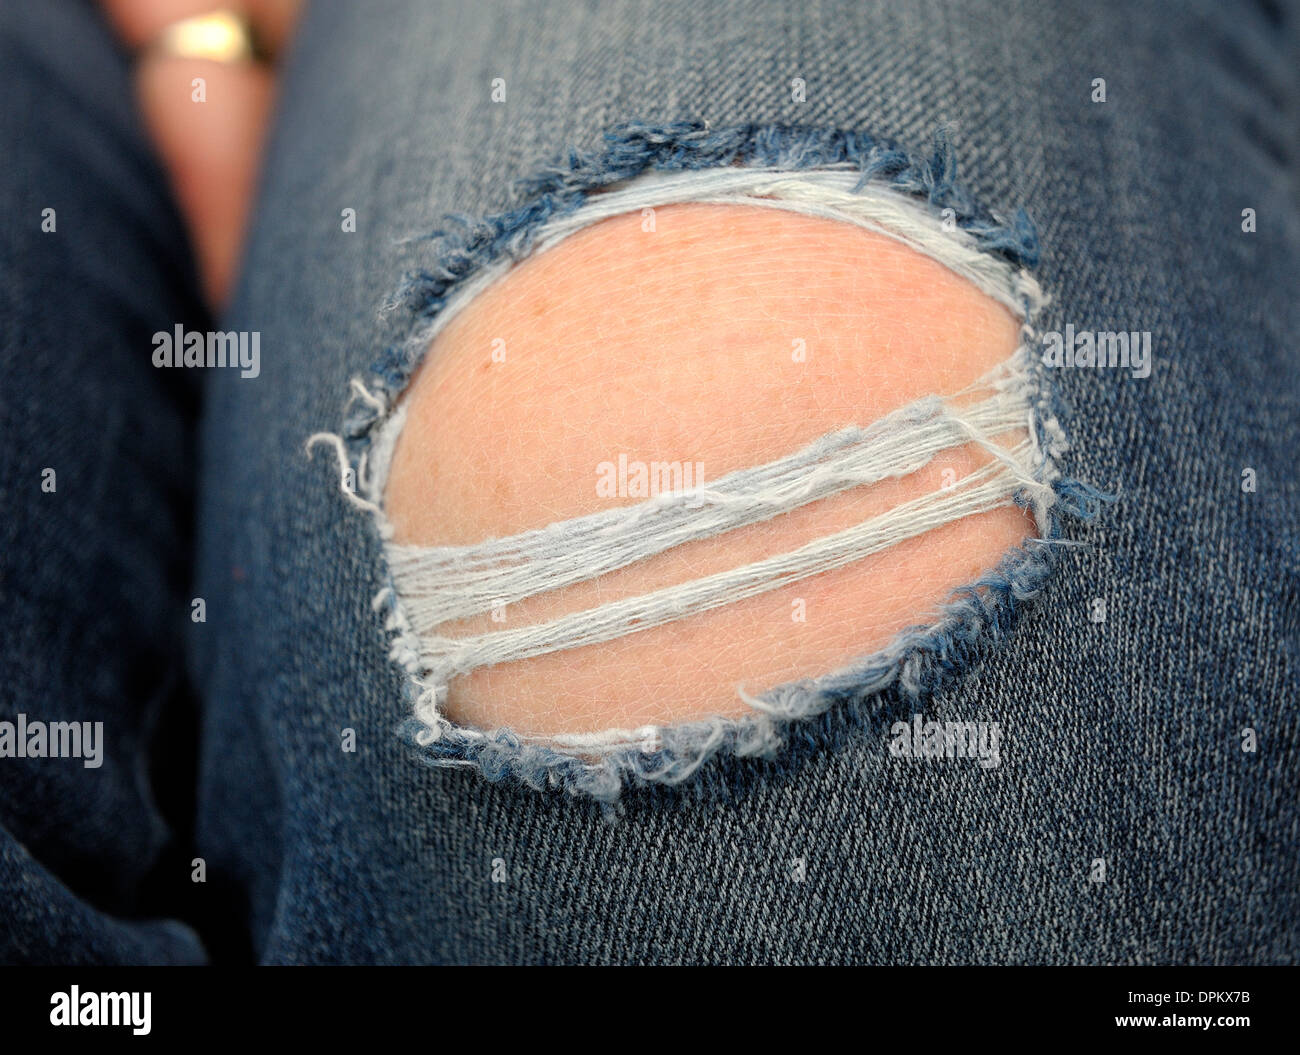 Denim jeans being worn with a large hole in the knee Stock Photo